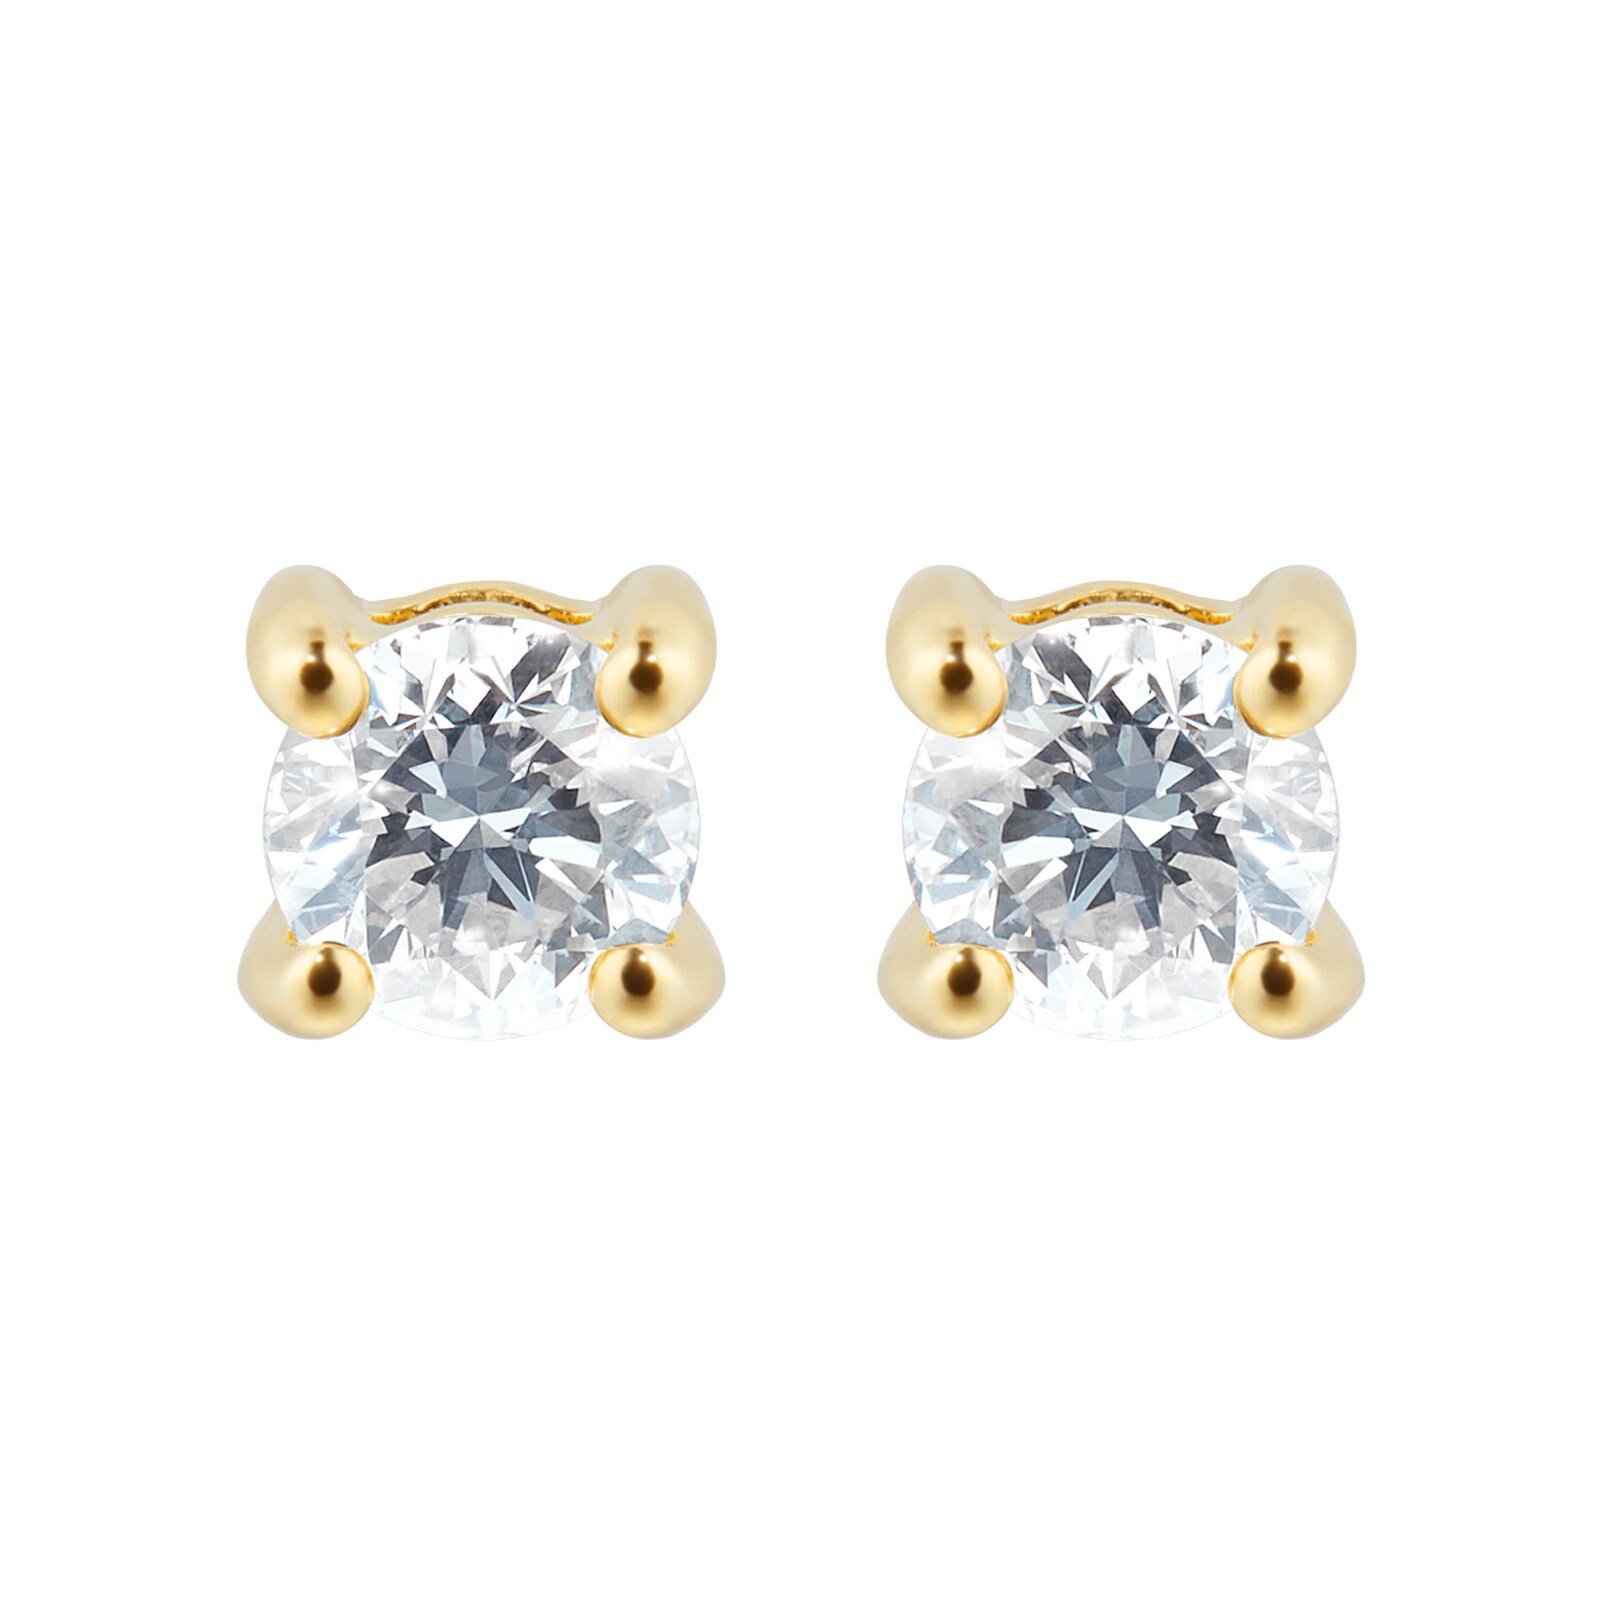 18ct Yellow Gold 0.25ct Goldsmiths Brightest Diamond 4 Claw Stud Earrings